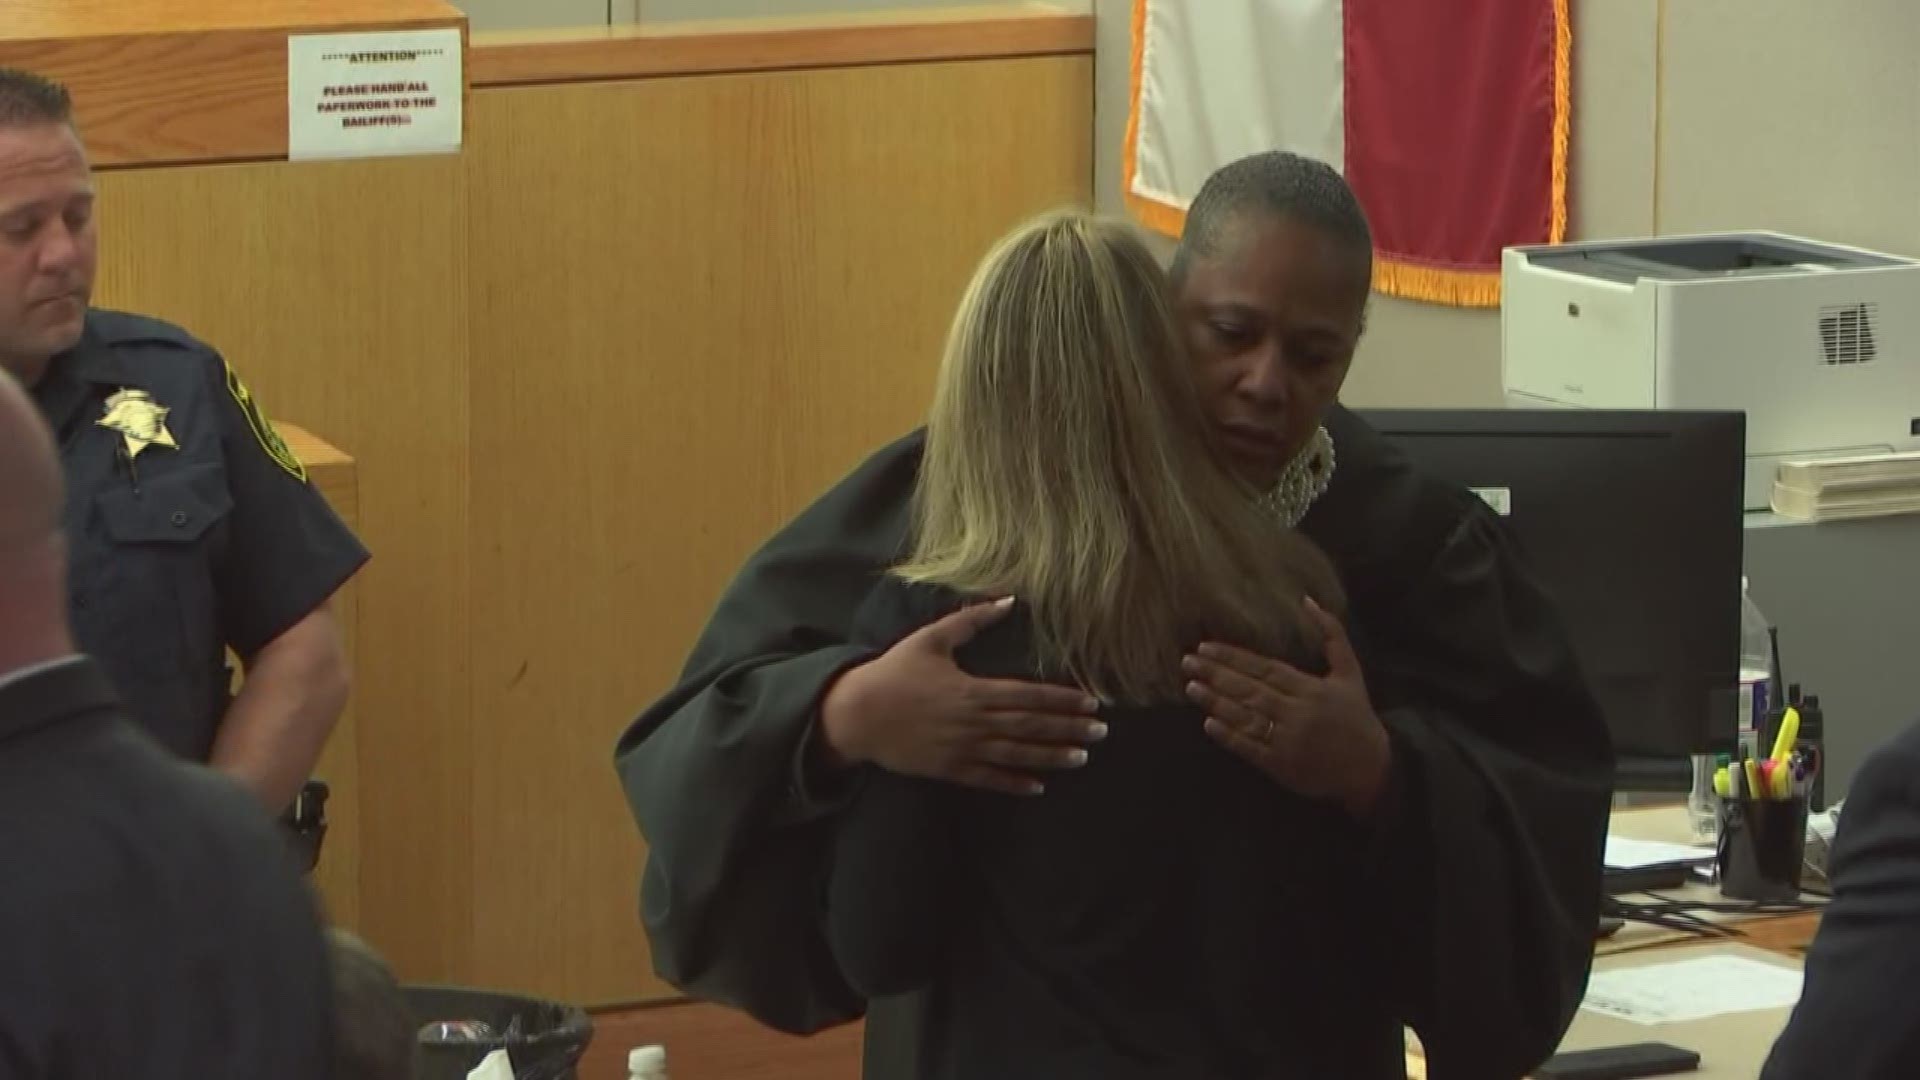 Judge Tammy Kemp shared a few words with and hugged Amber Guyger after the end of the trial.